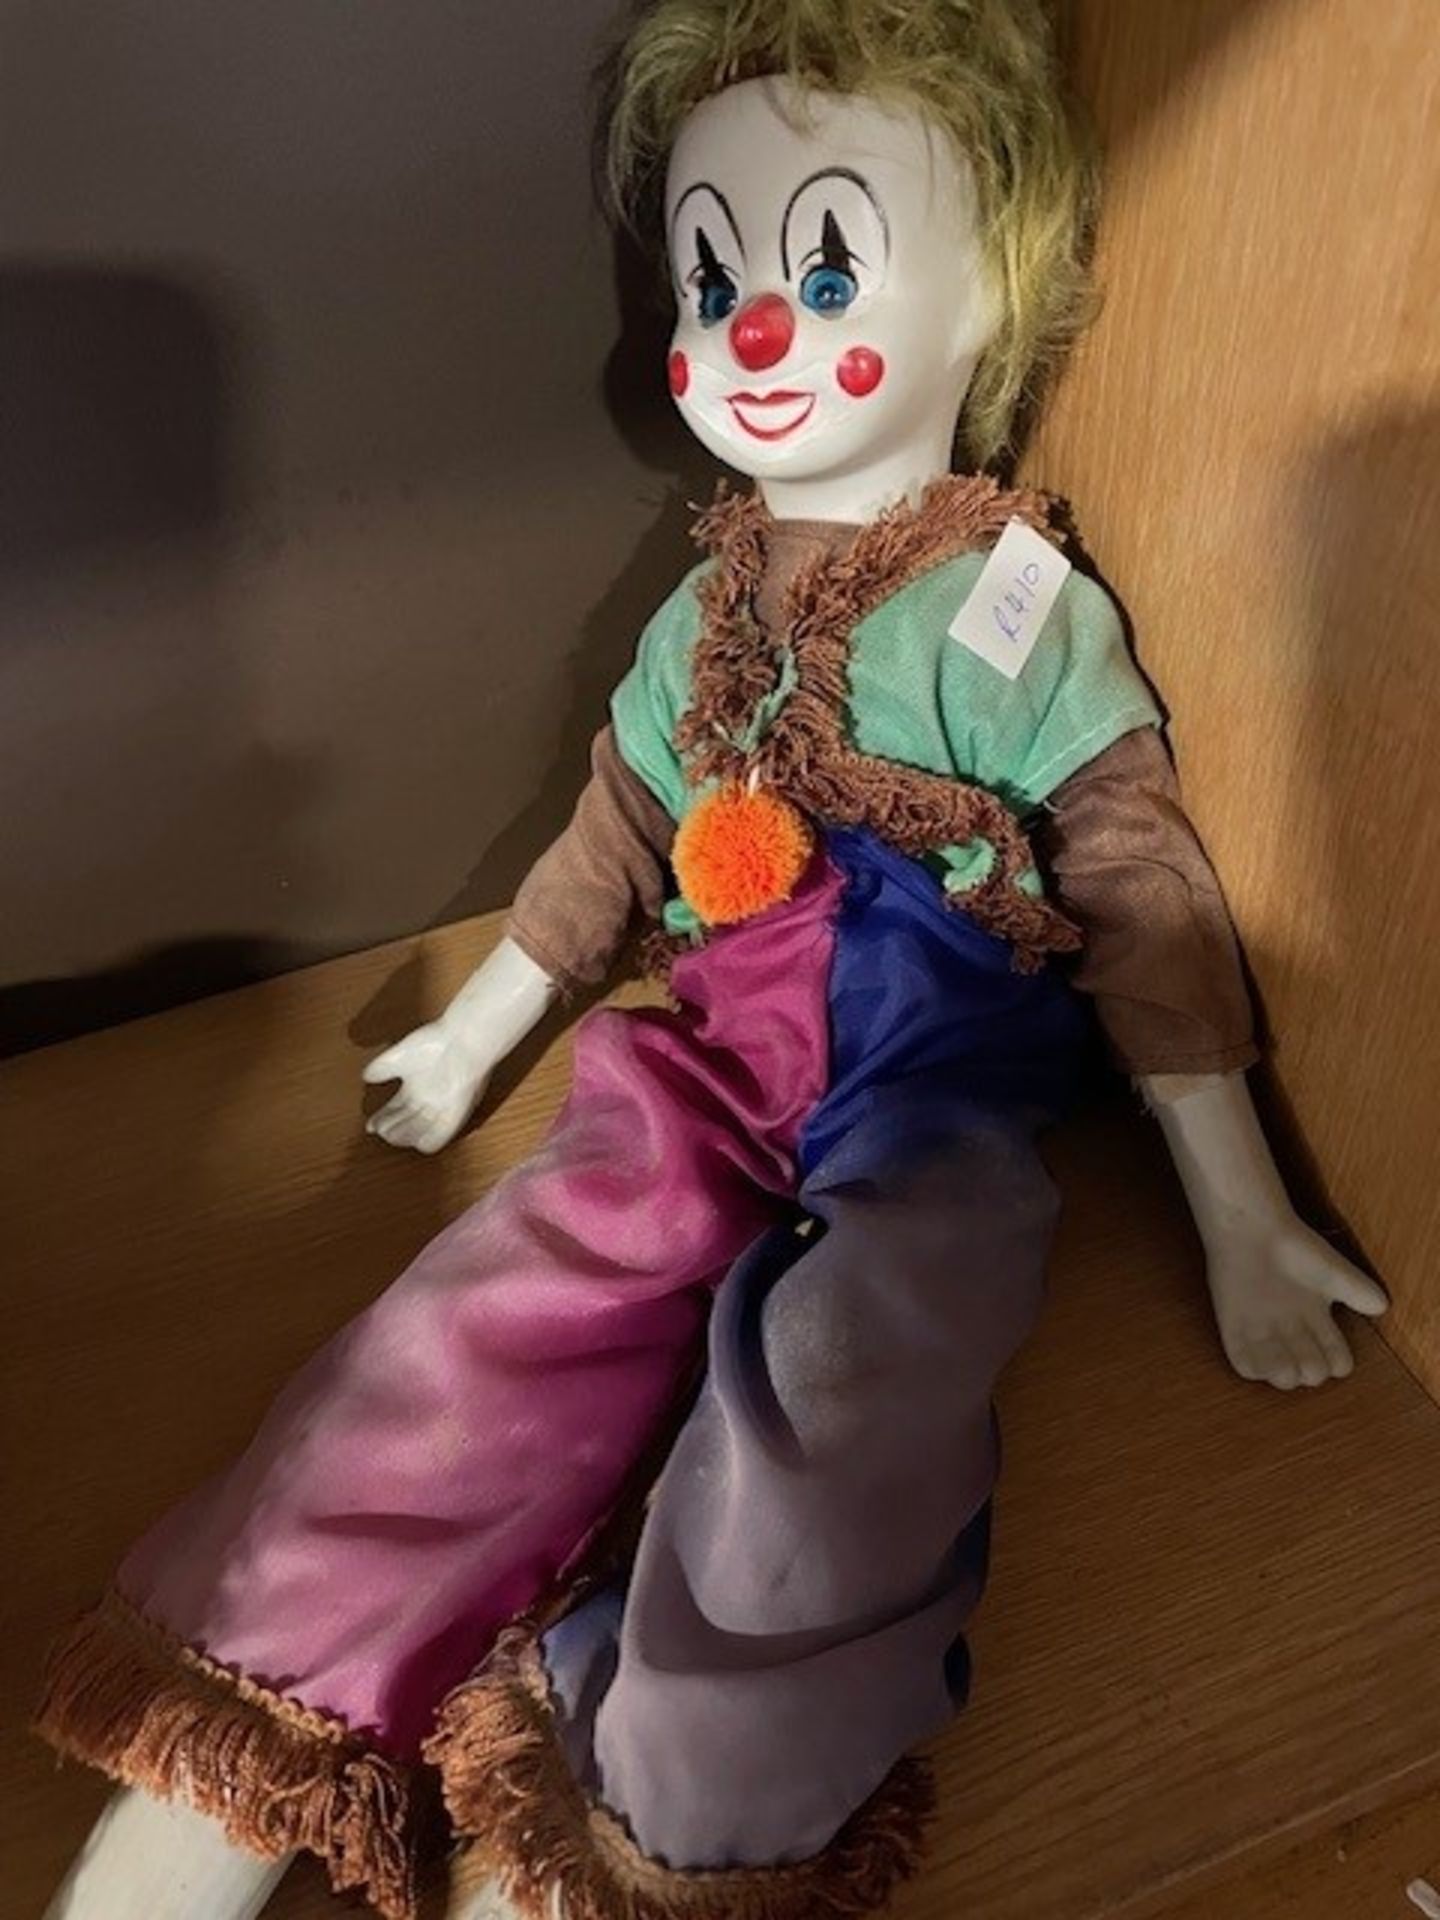 Two Vintage Dolls Including a Clown Doll - Image 7 of 7